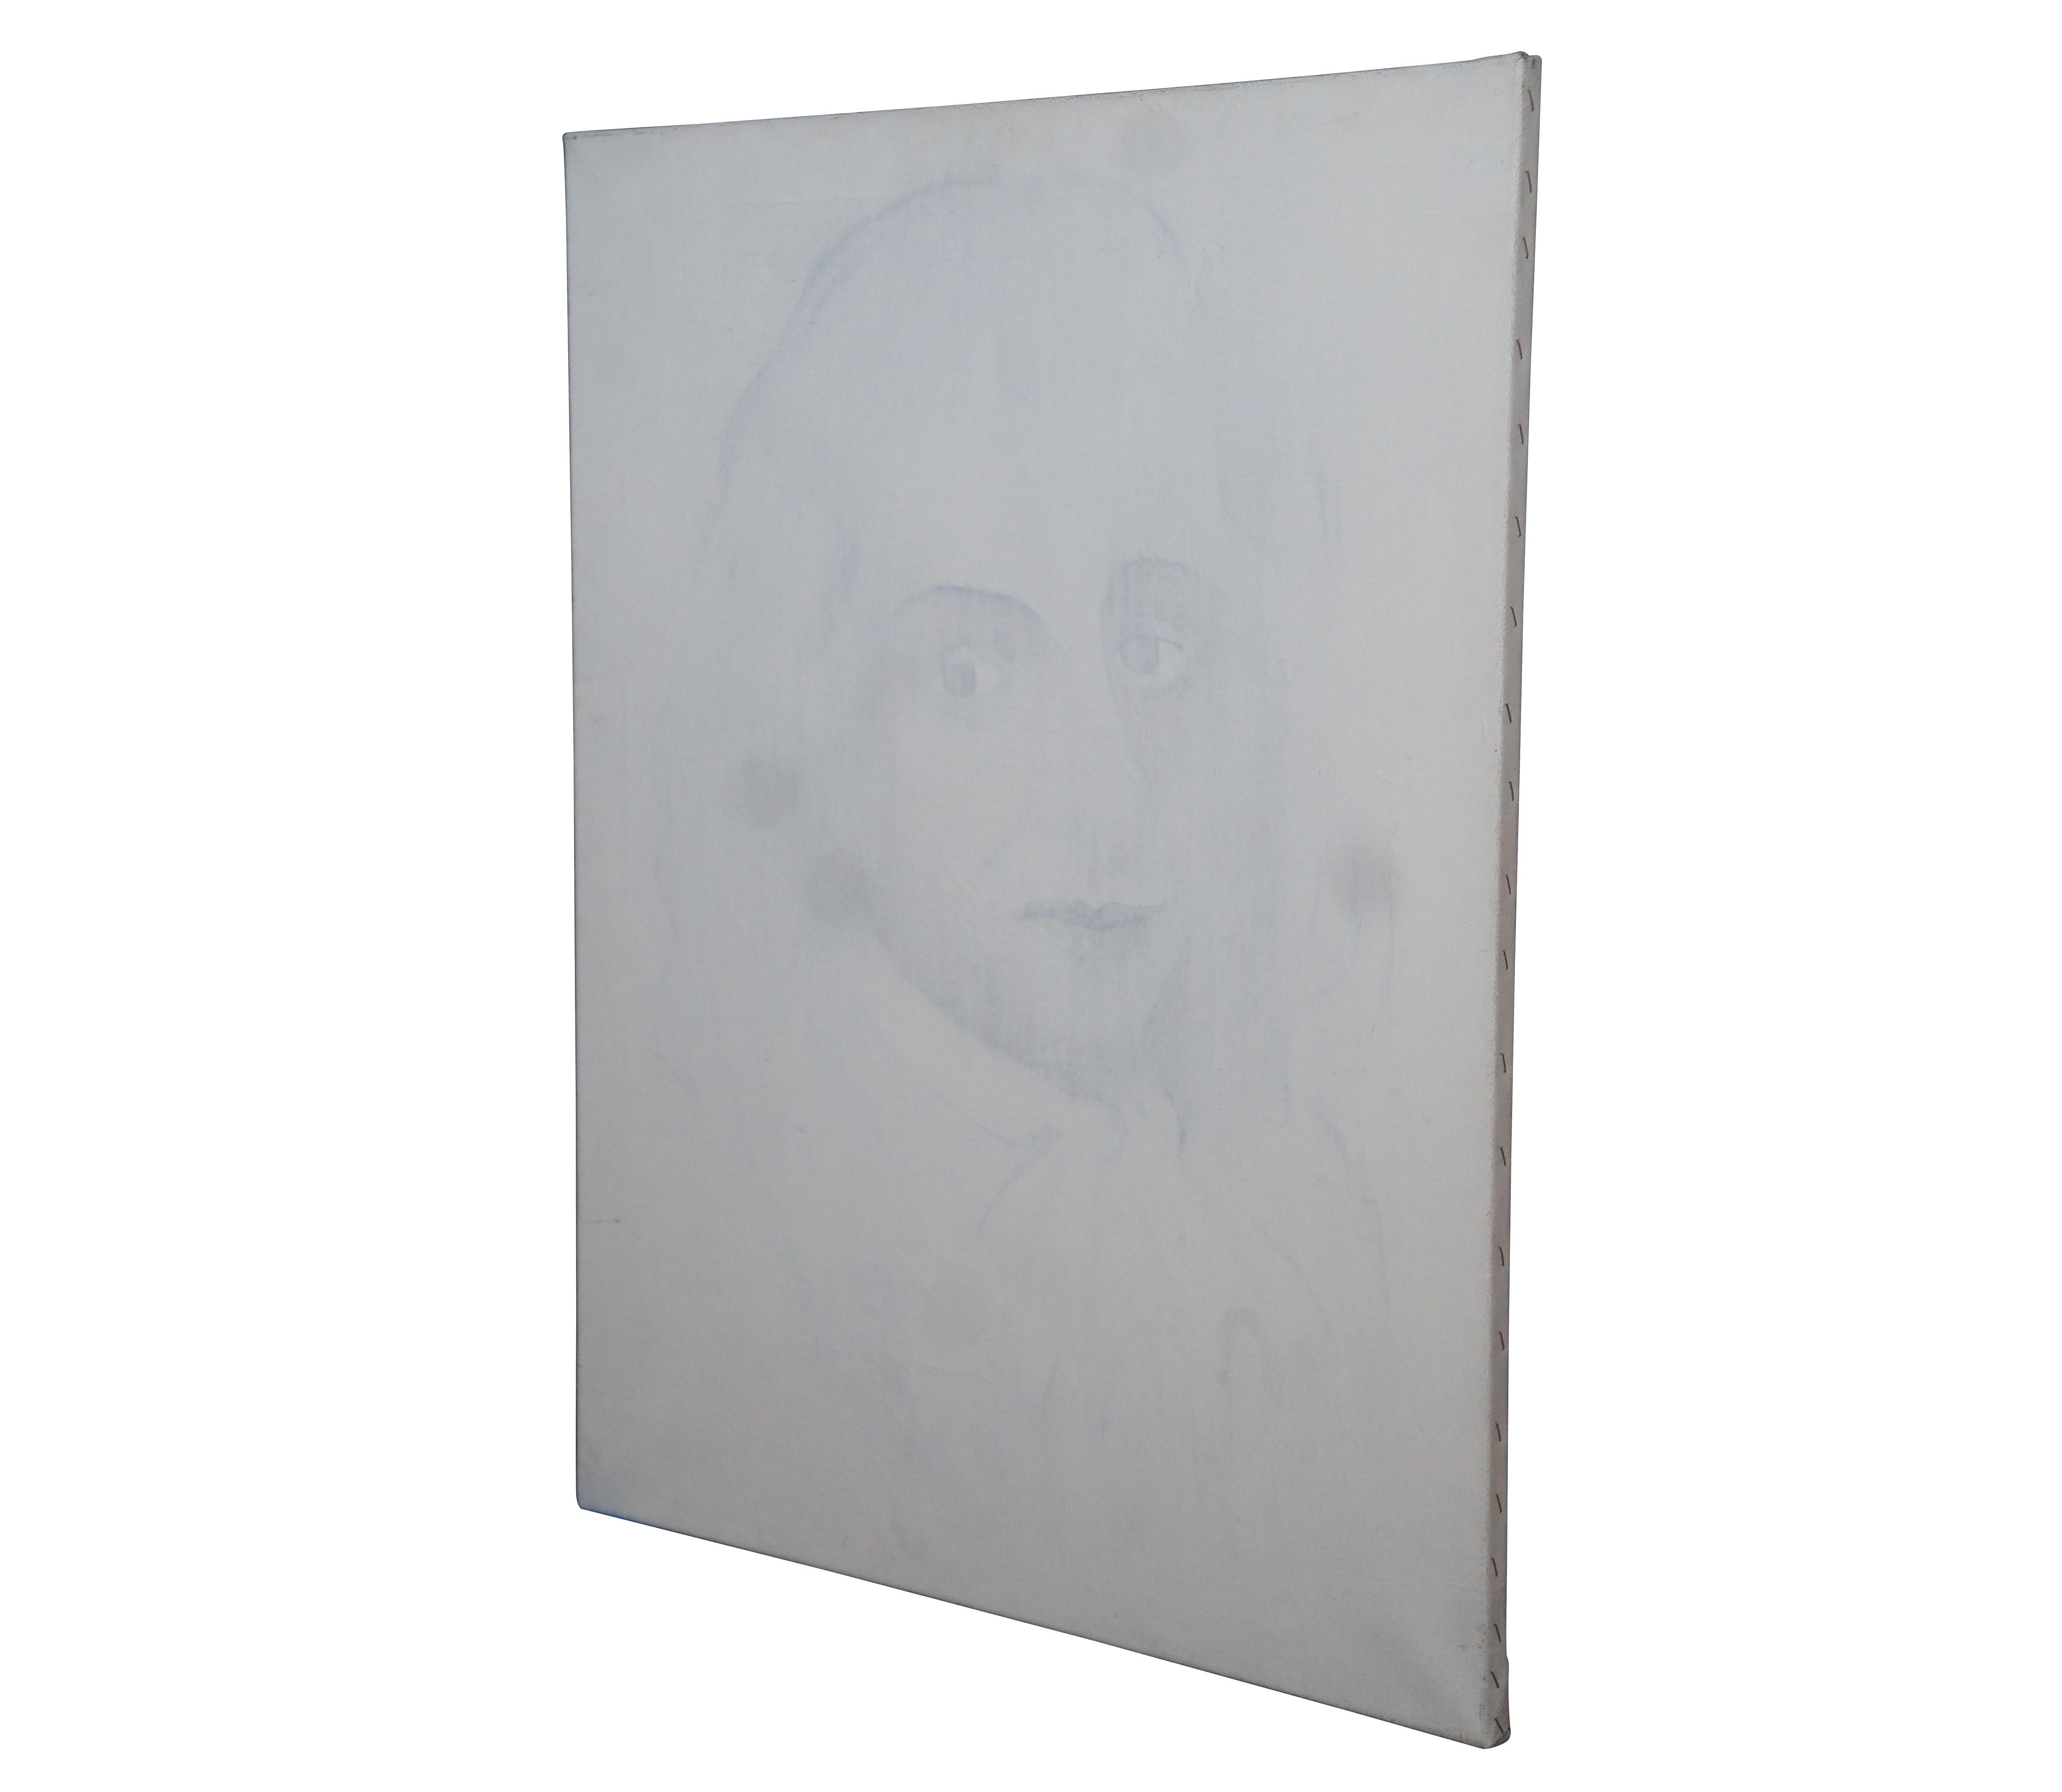 A unique modern portrait painting on burlap of Wolfgang Amadeus Mozart, with a white wash finish / overlay. Signed and dated by artist on verso. Measure: 40